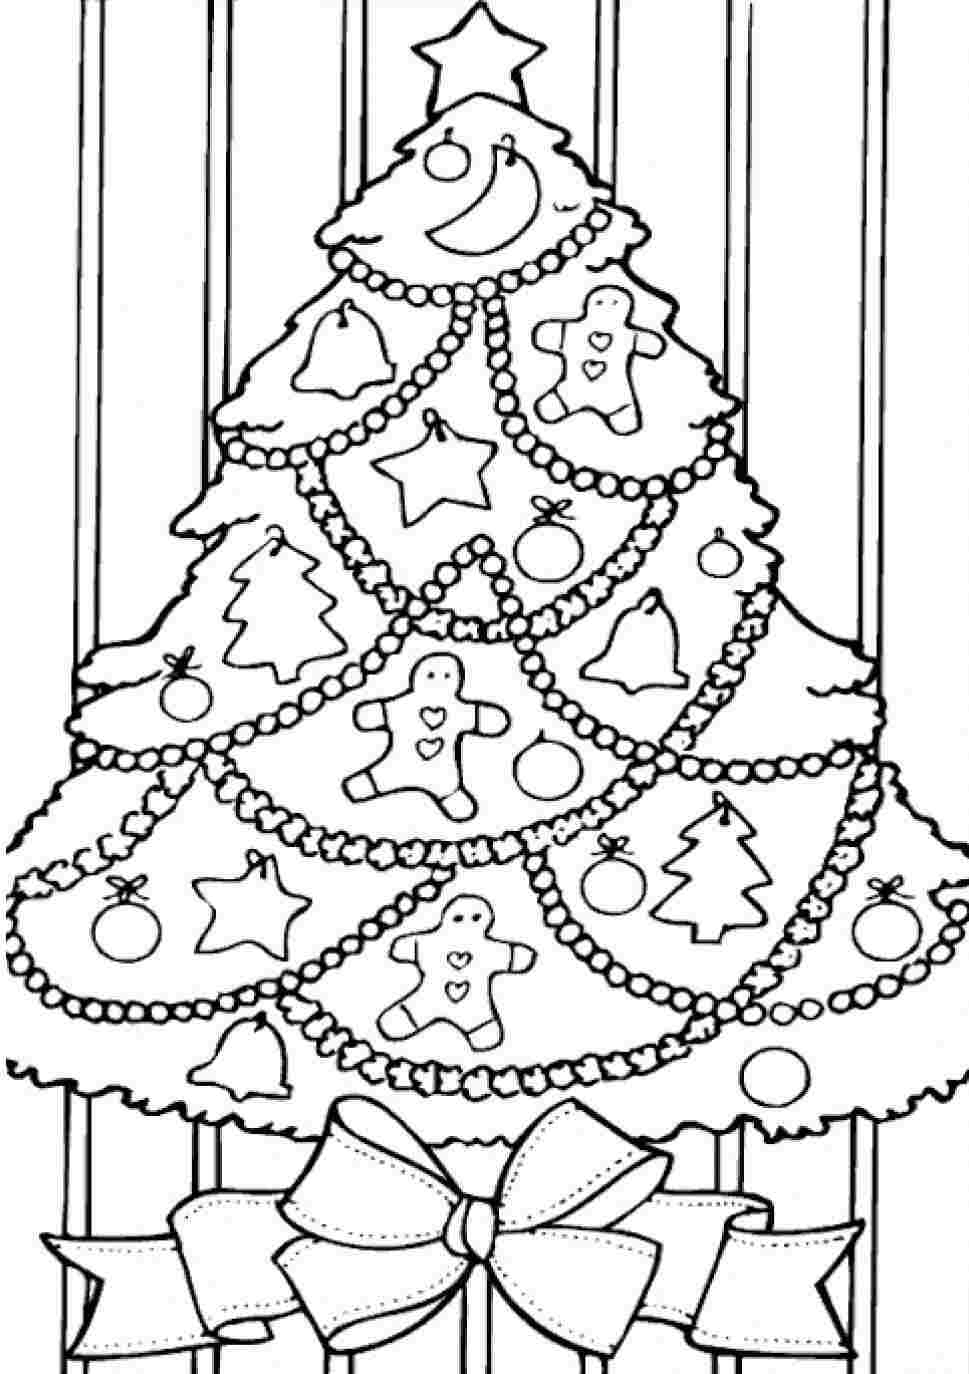 Printable Christmas Tree Coloring Pages  Coloring Me